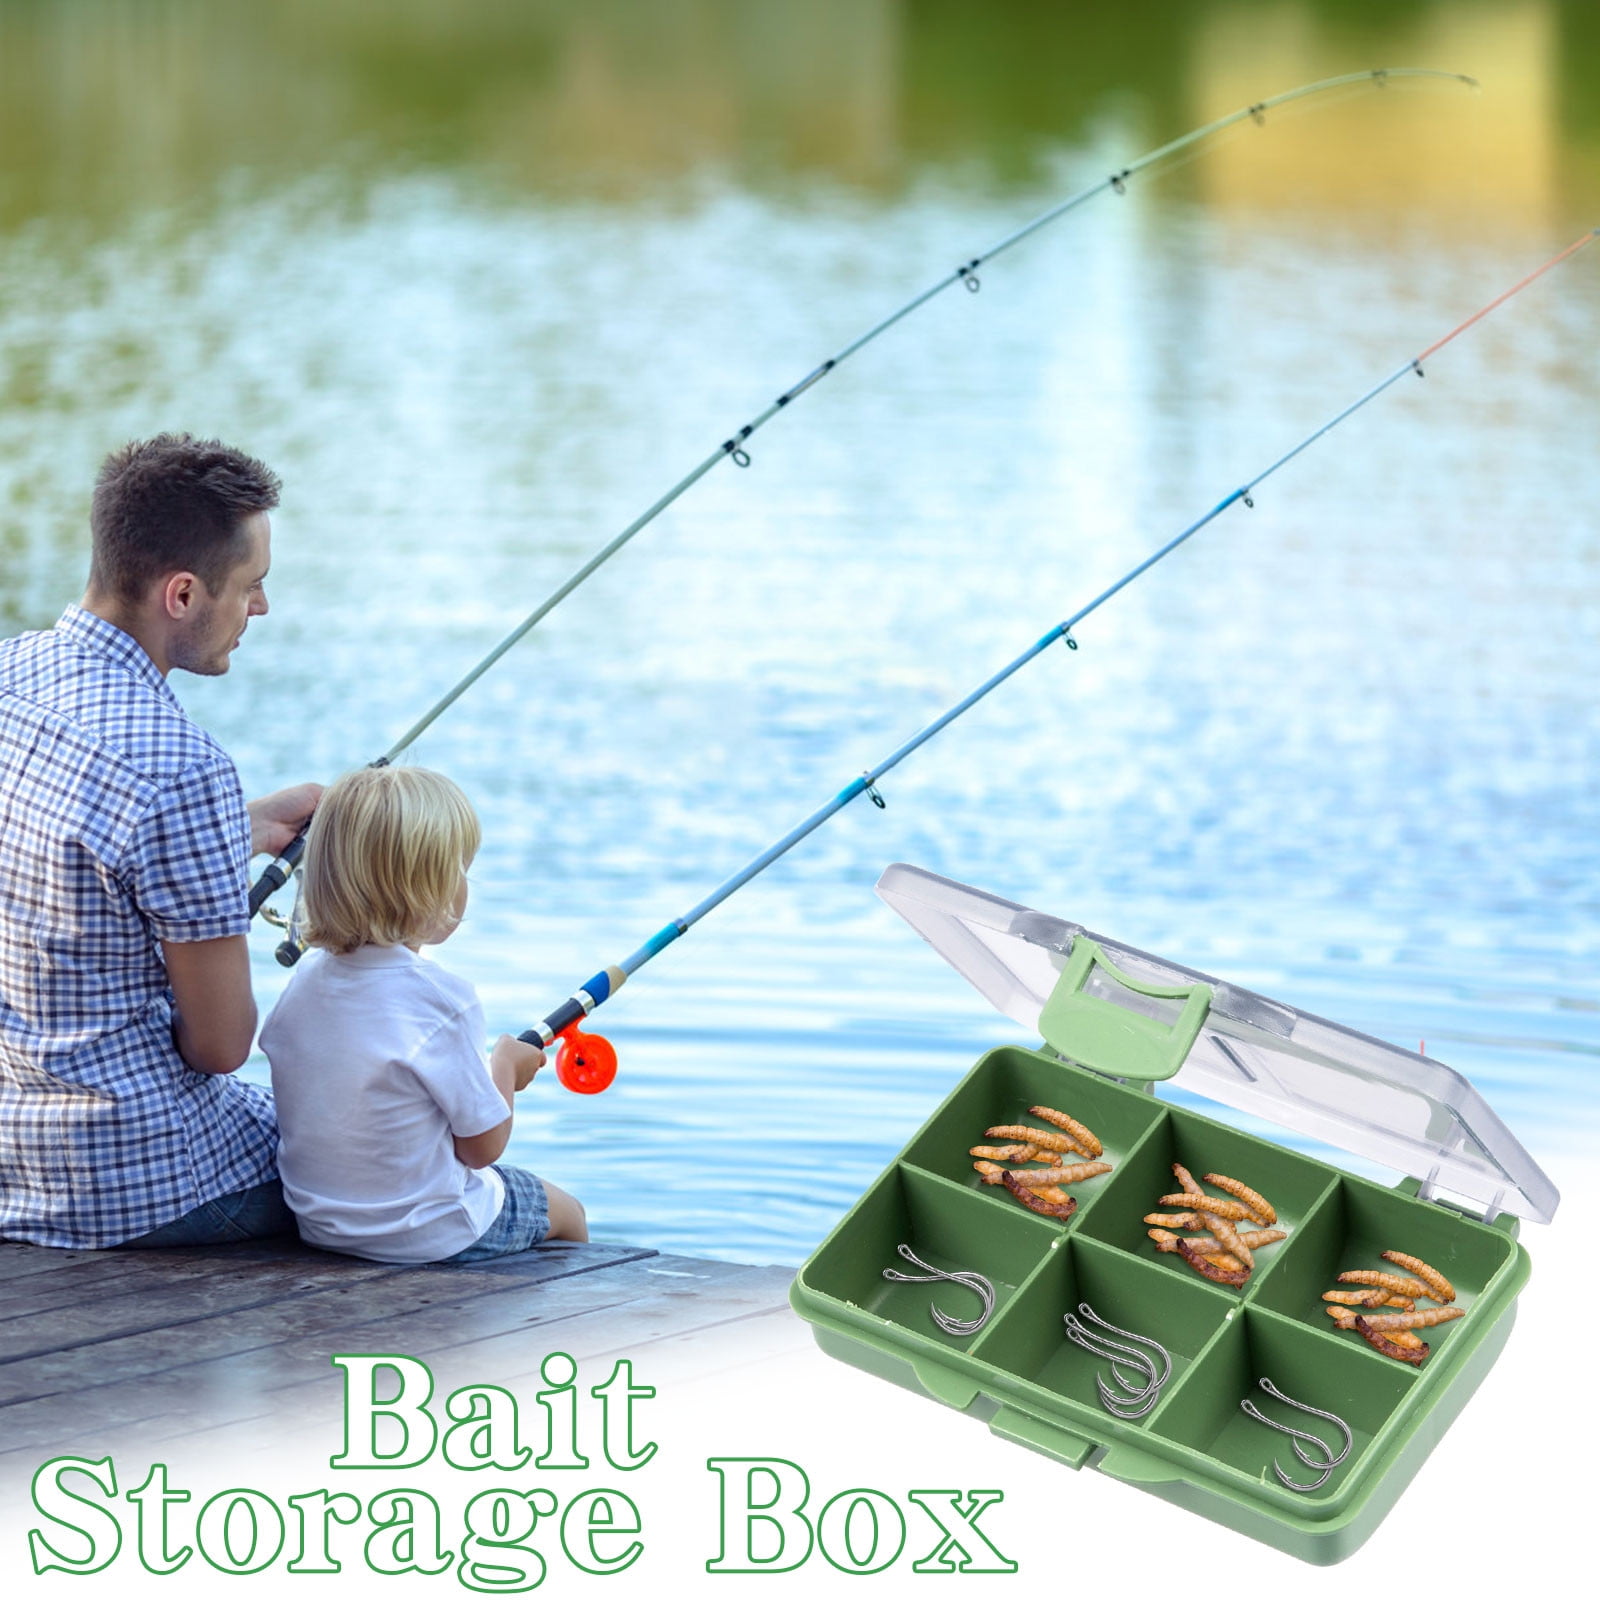 Sdjma Small Clear Visible Plastic Fishing Tackle Accessory Box Fishing Lure Bait Hooks Storage Box Case Container Organizer Box